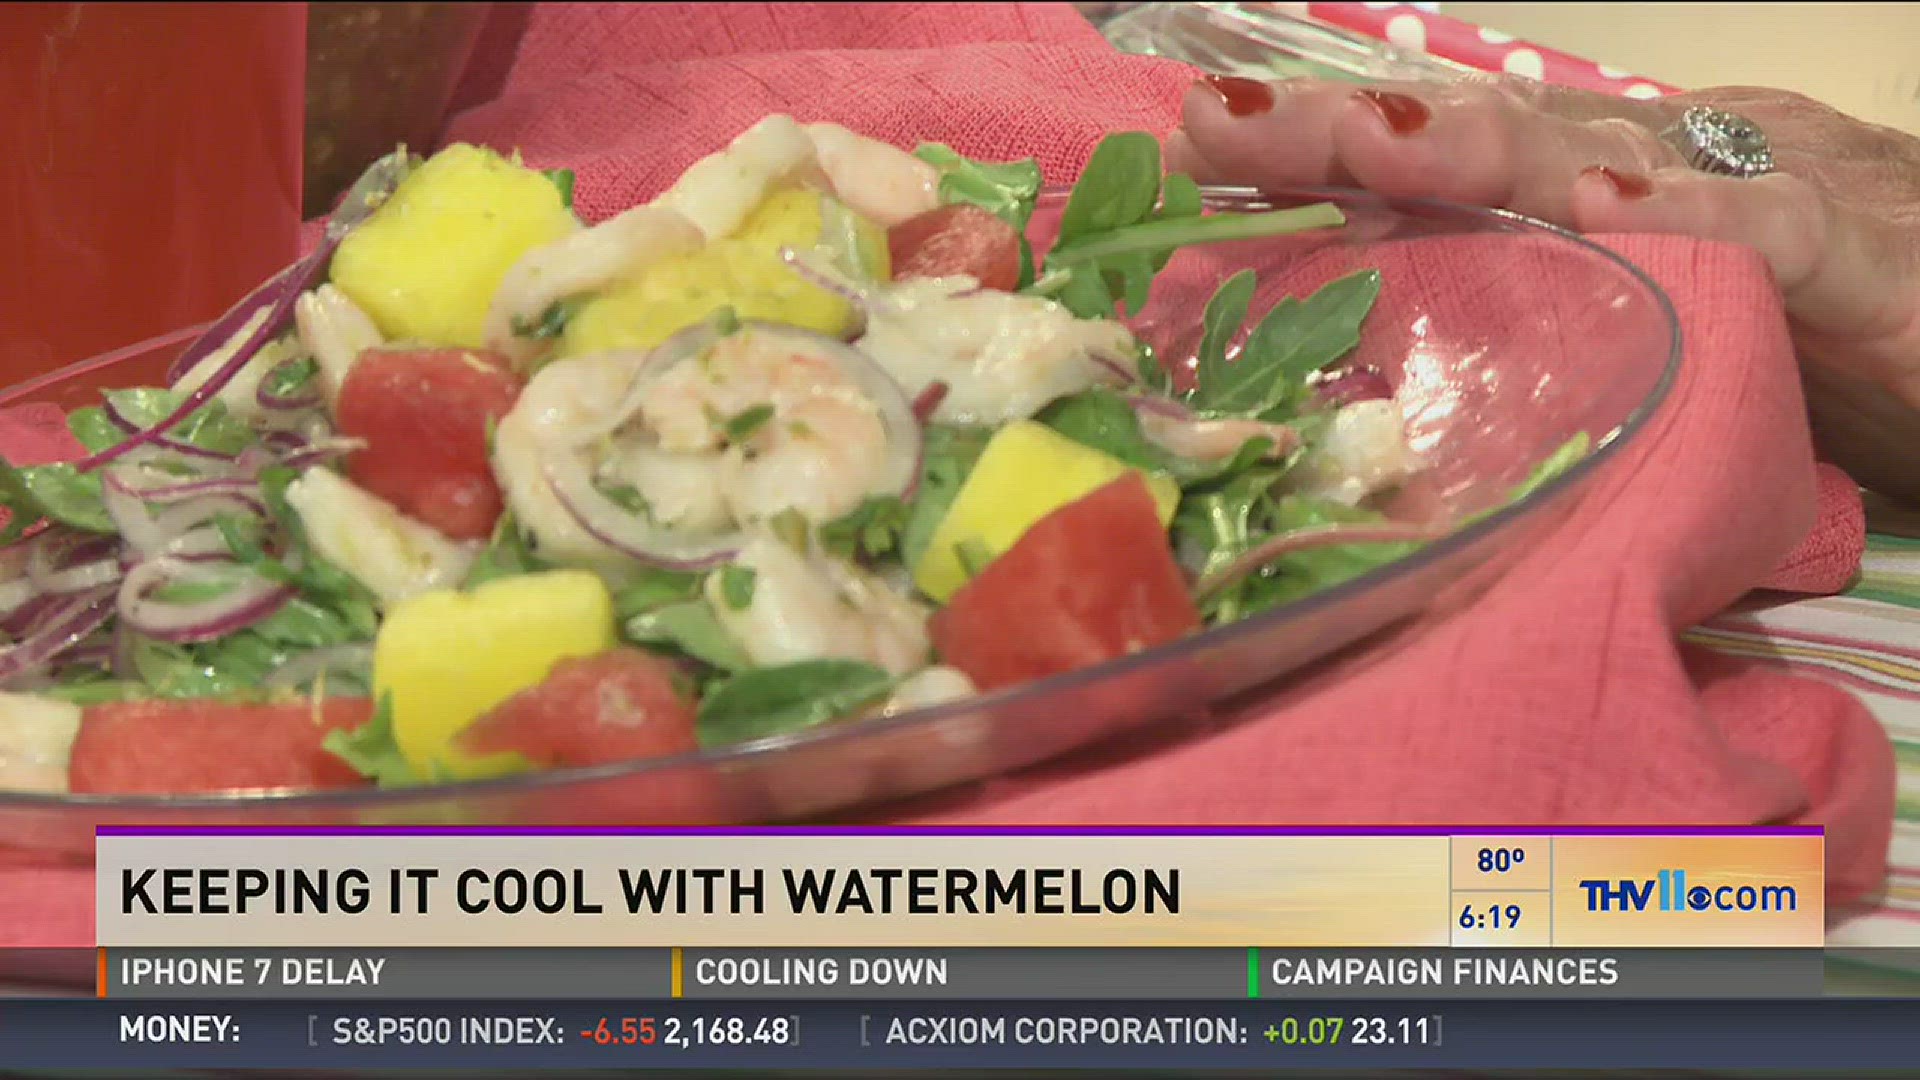 Food blogger Debbie Arnold joined THV This Morning with her favorite watermelon recipes